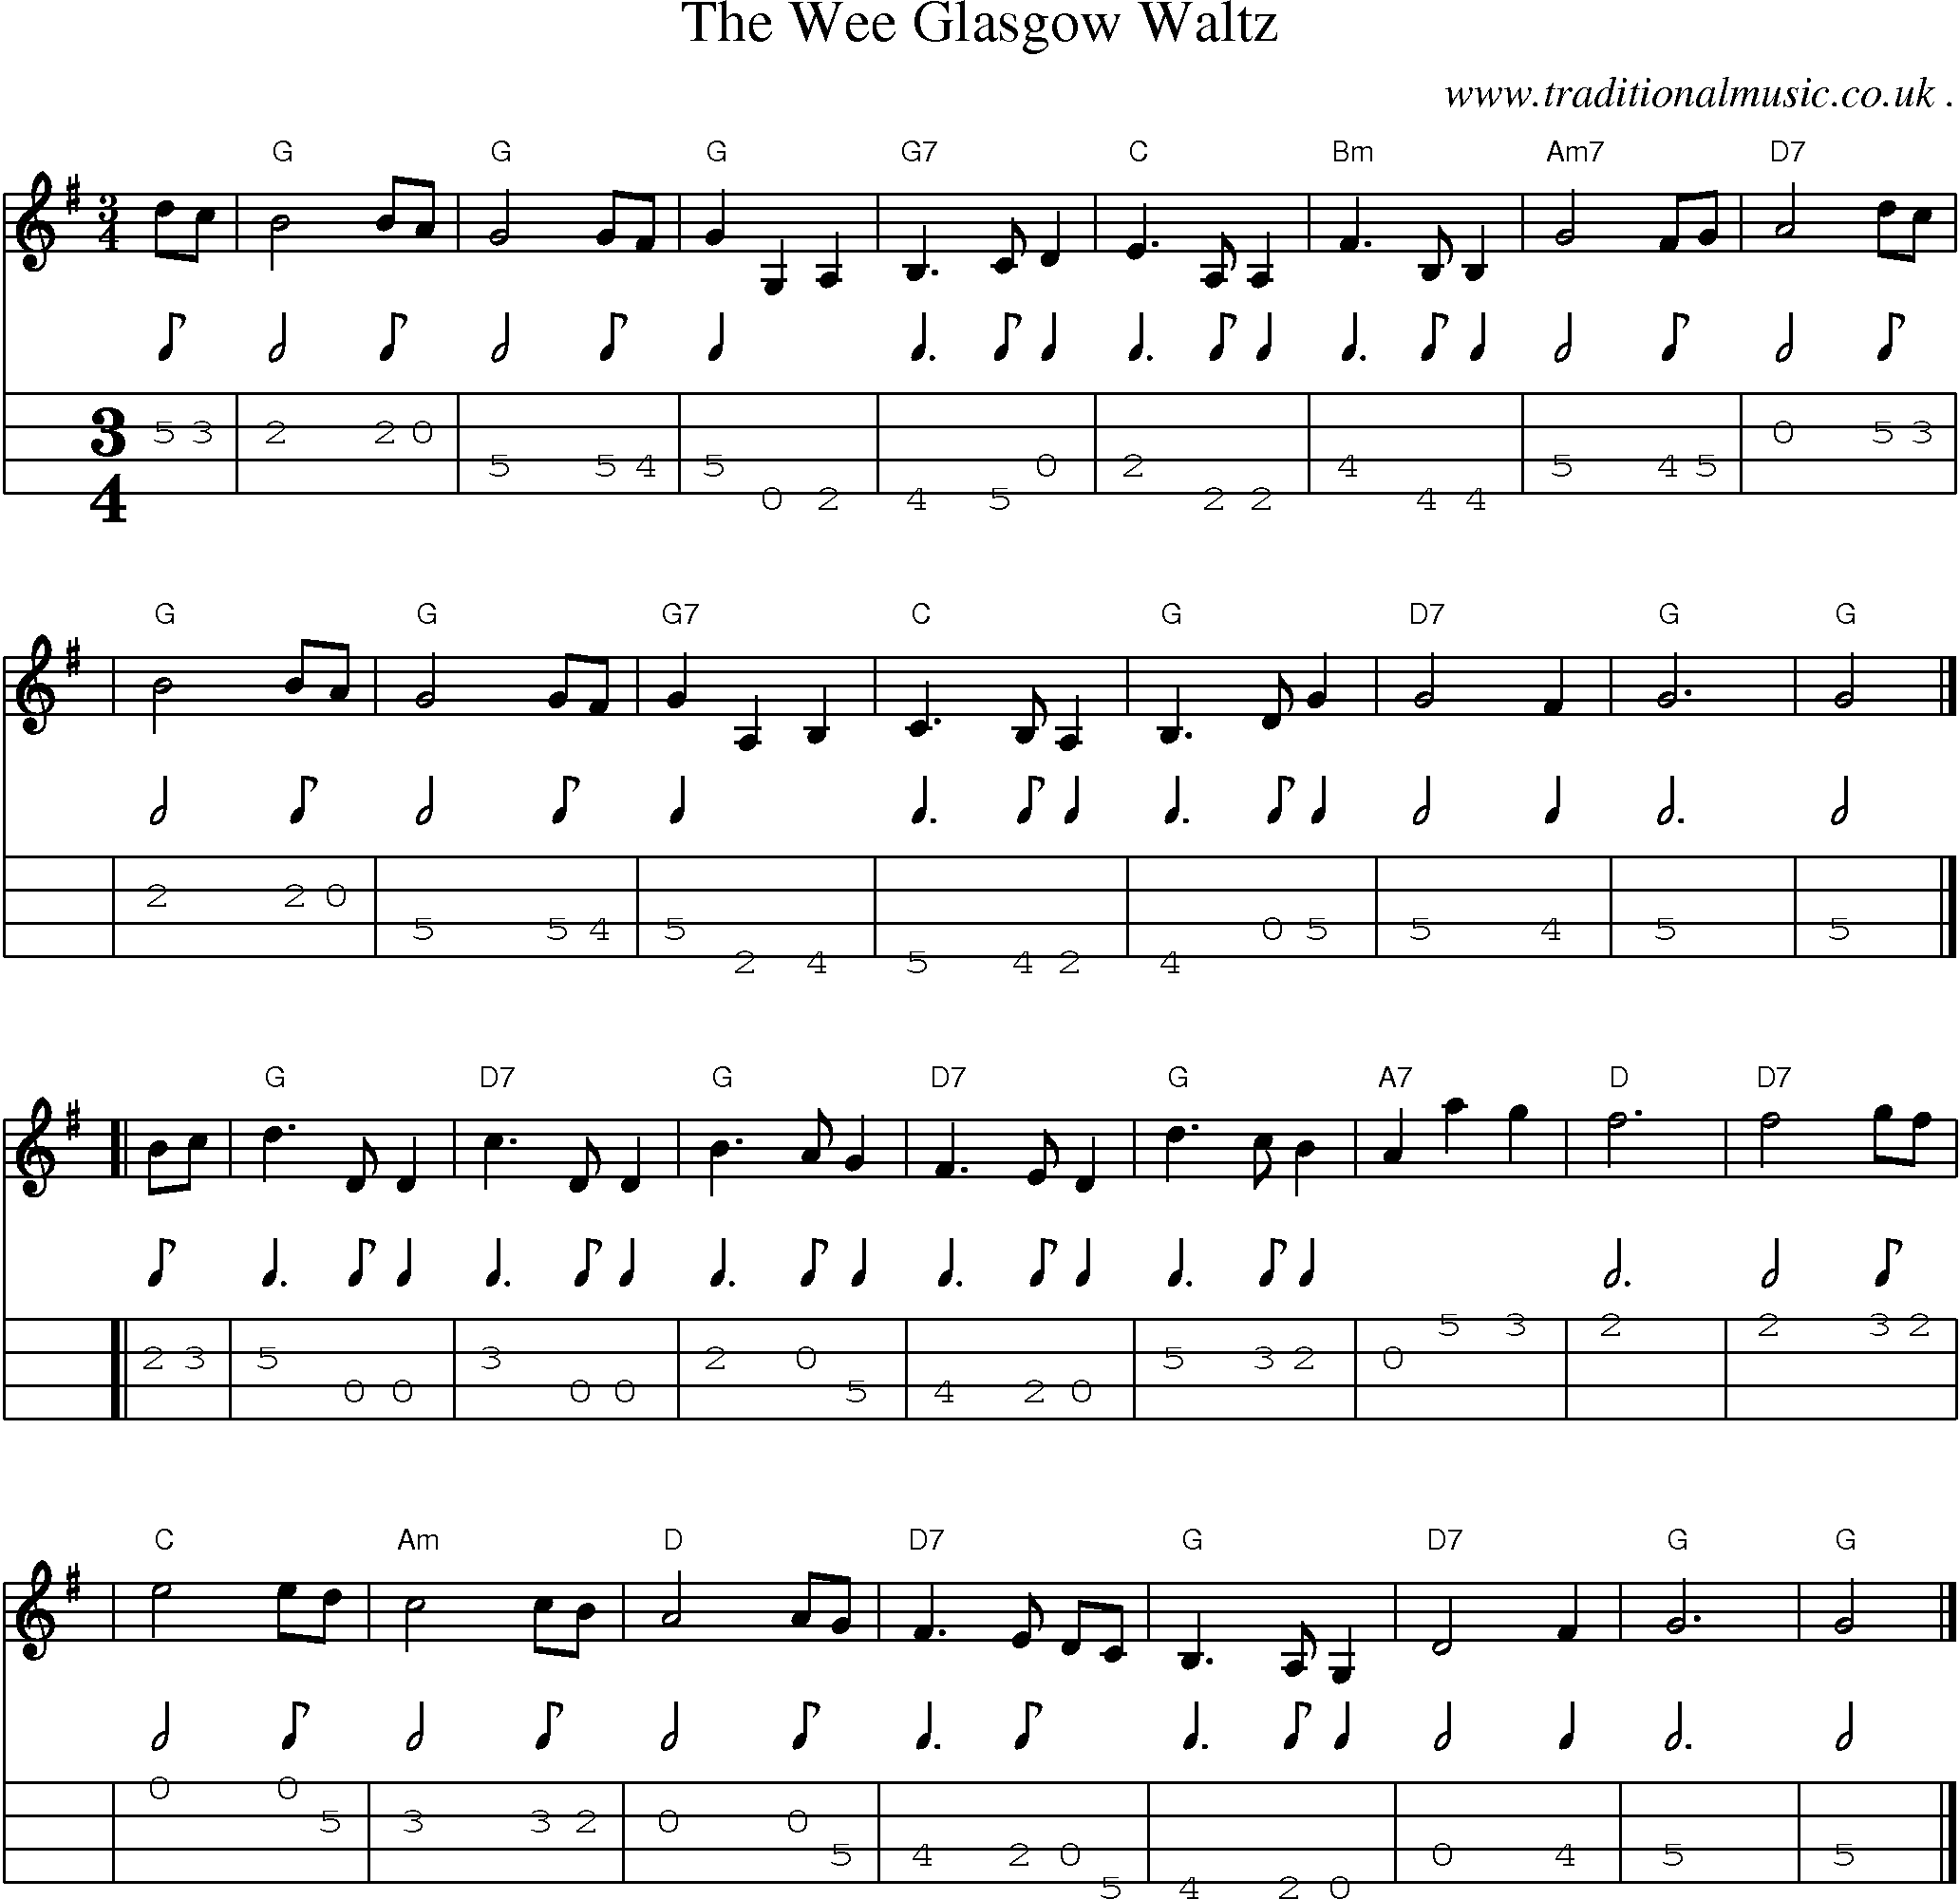 Sheet-music  score, Chords and Mandolin Tabs for The Wee Glasgow Waltz